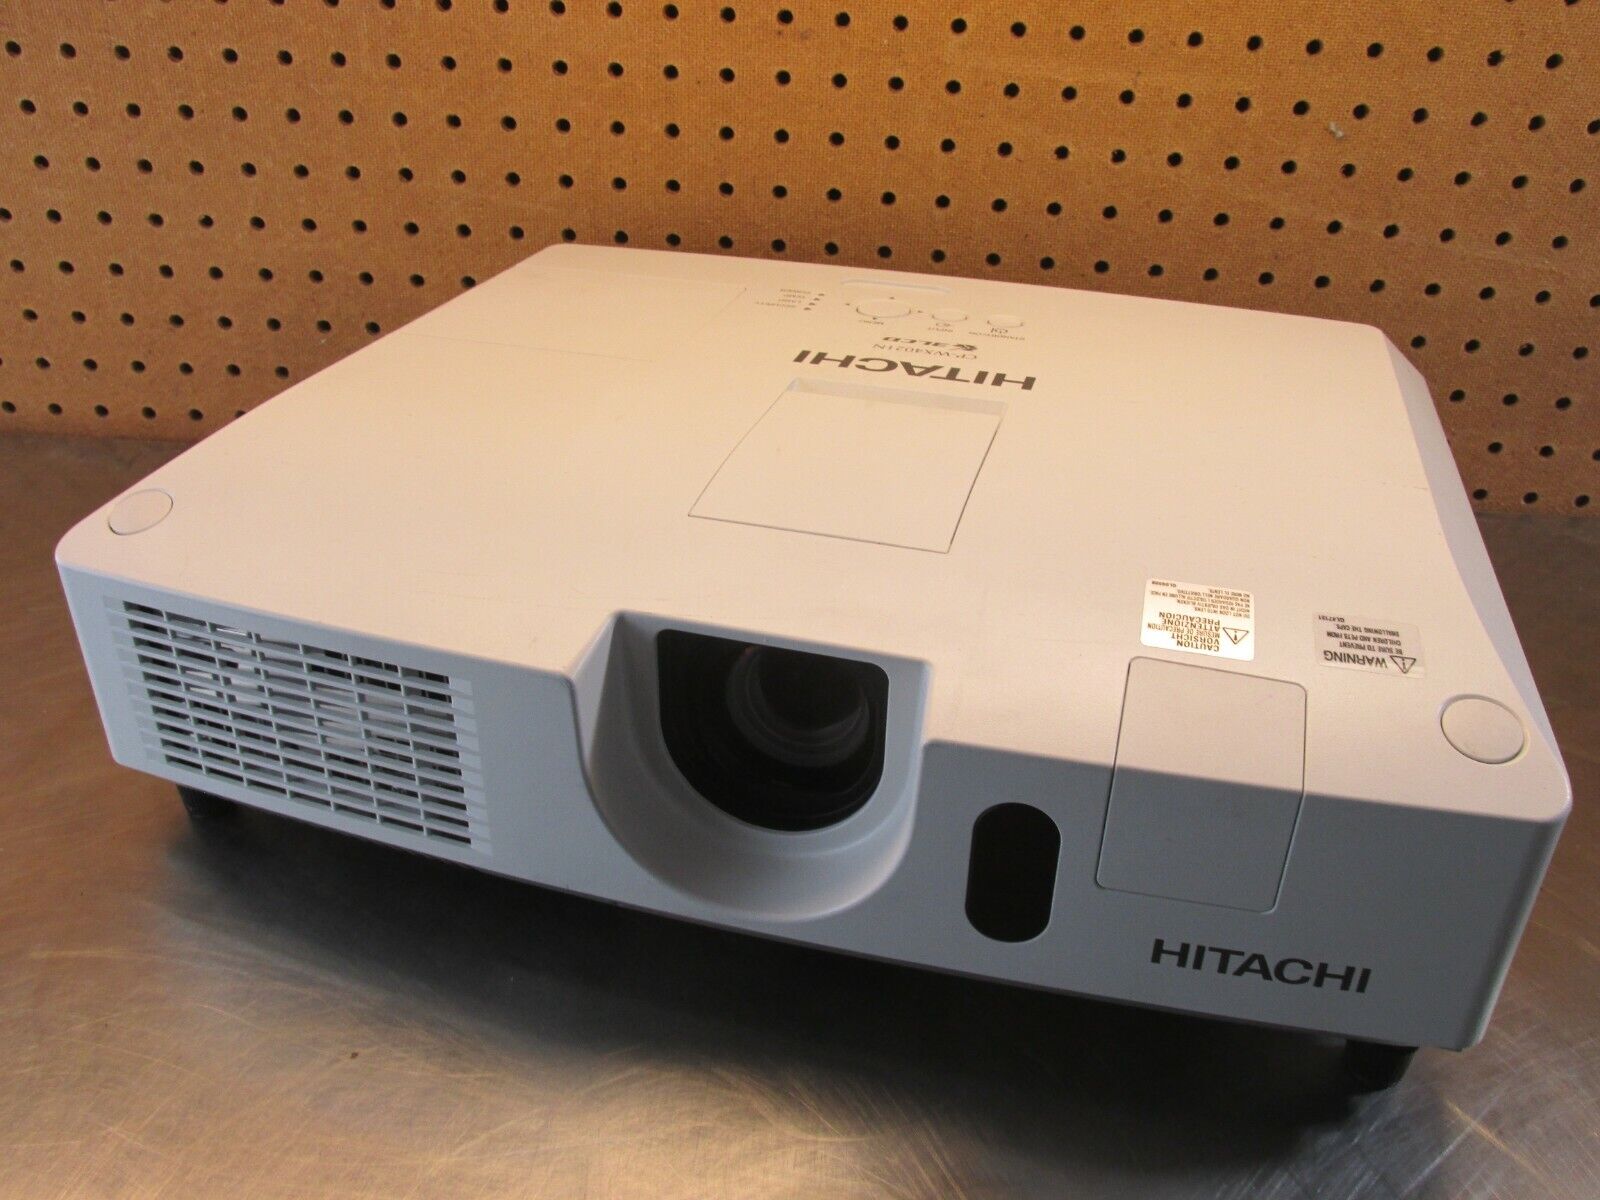 LOT 2pcs Hitachi CP-WX4021N LCD HD 3LCD Projector w HDMI -Works Great NO Lamps